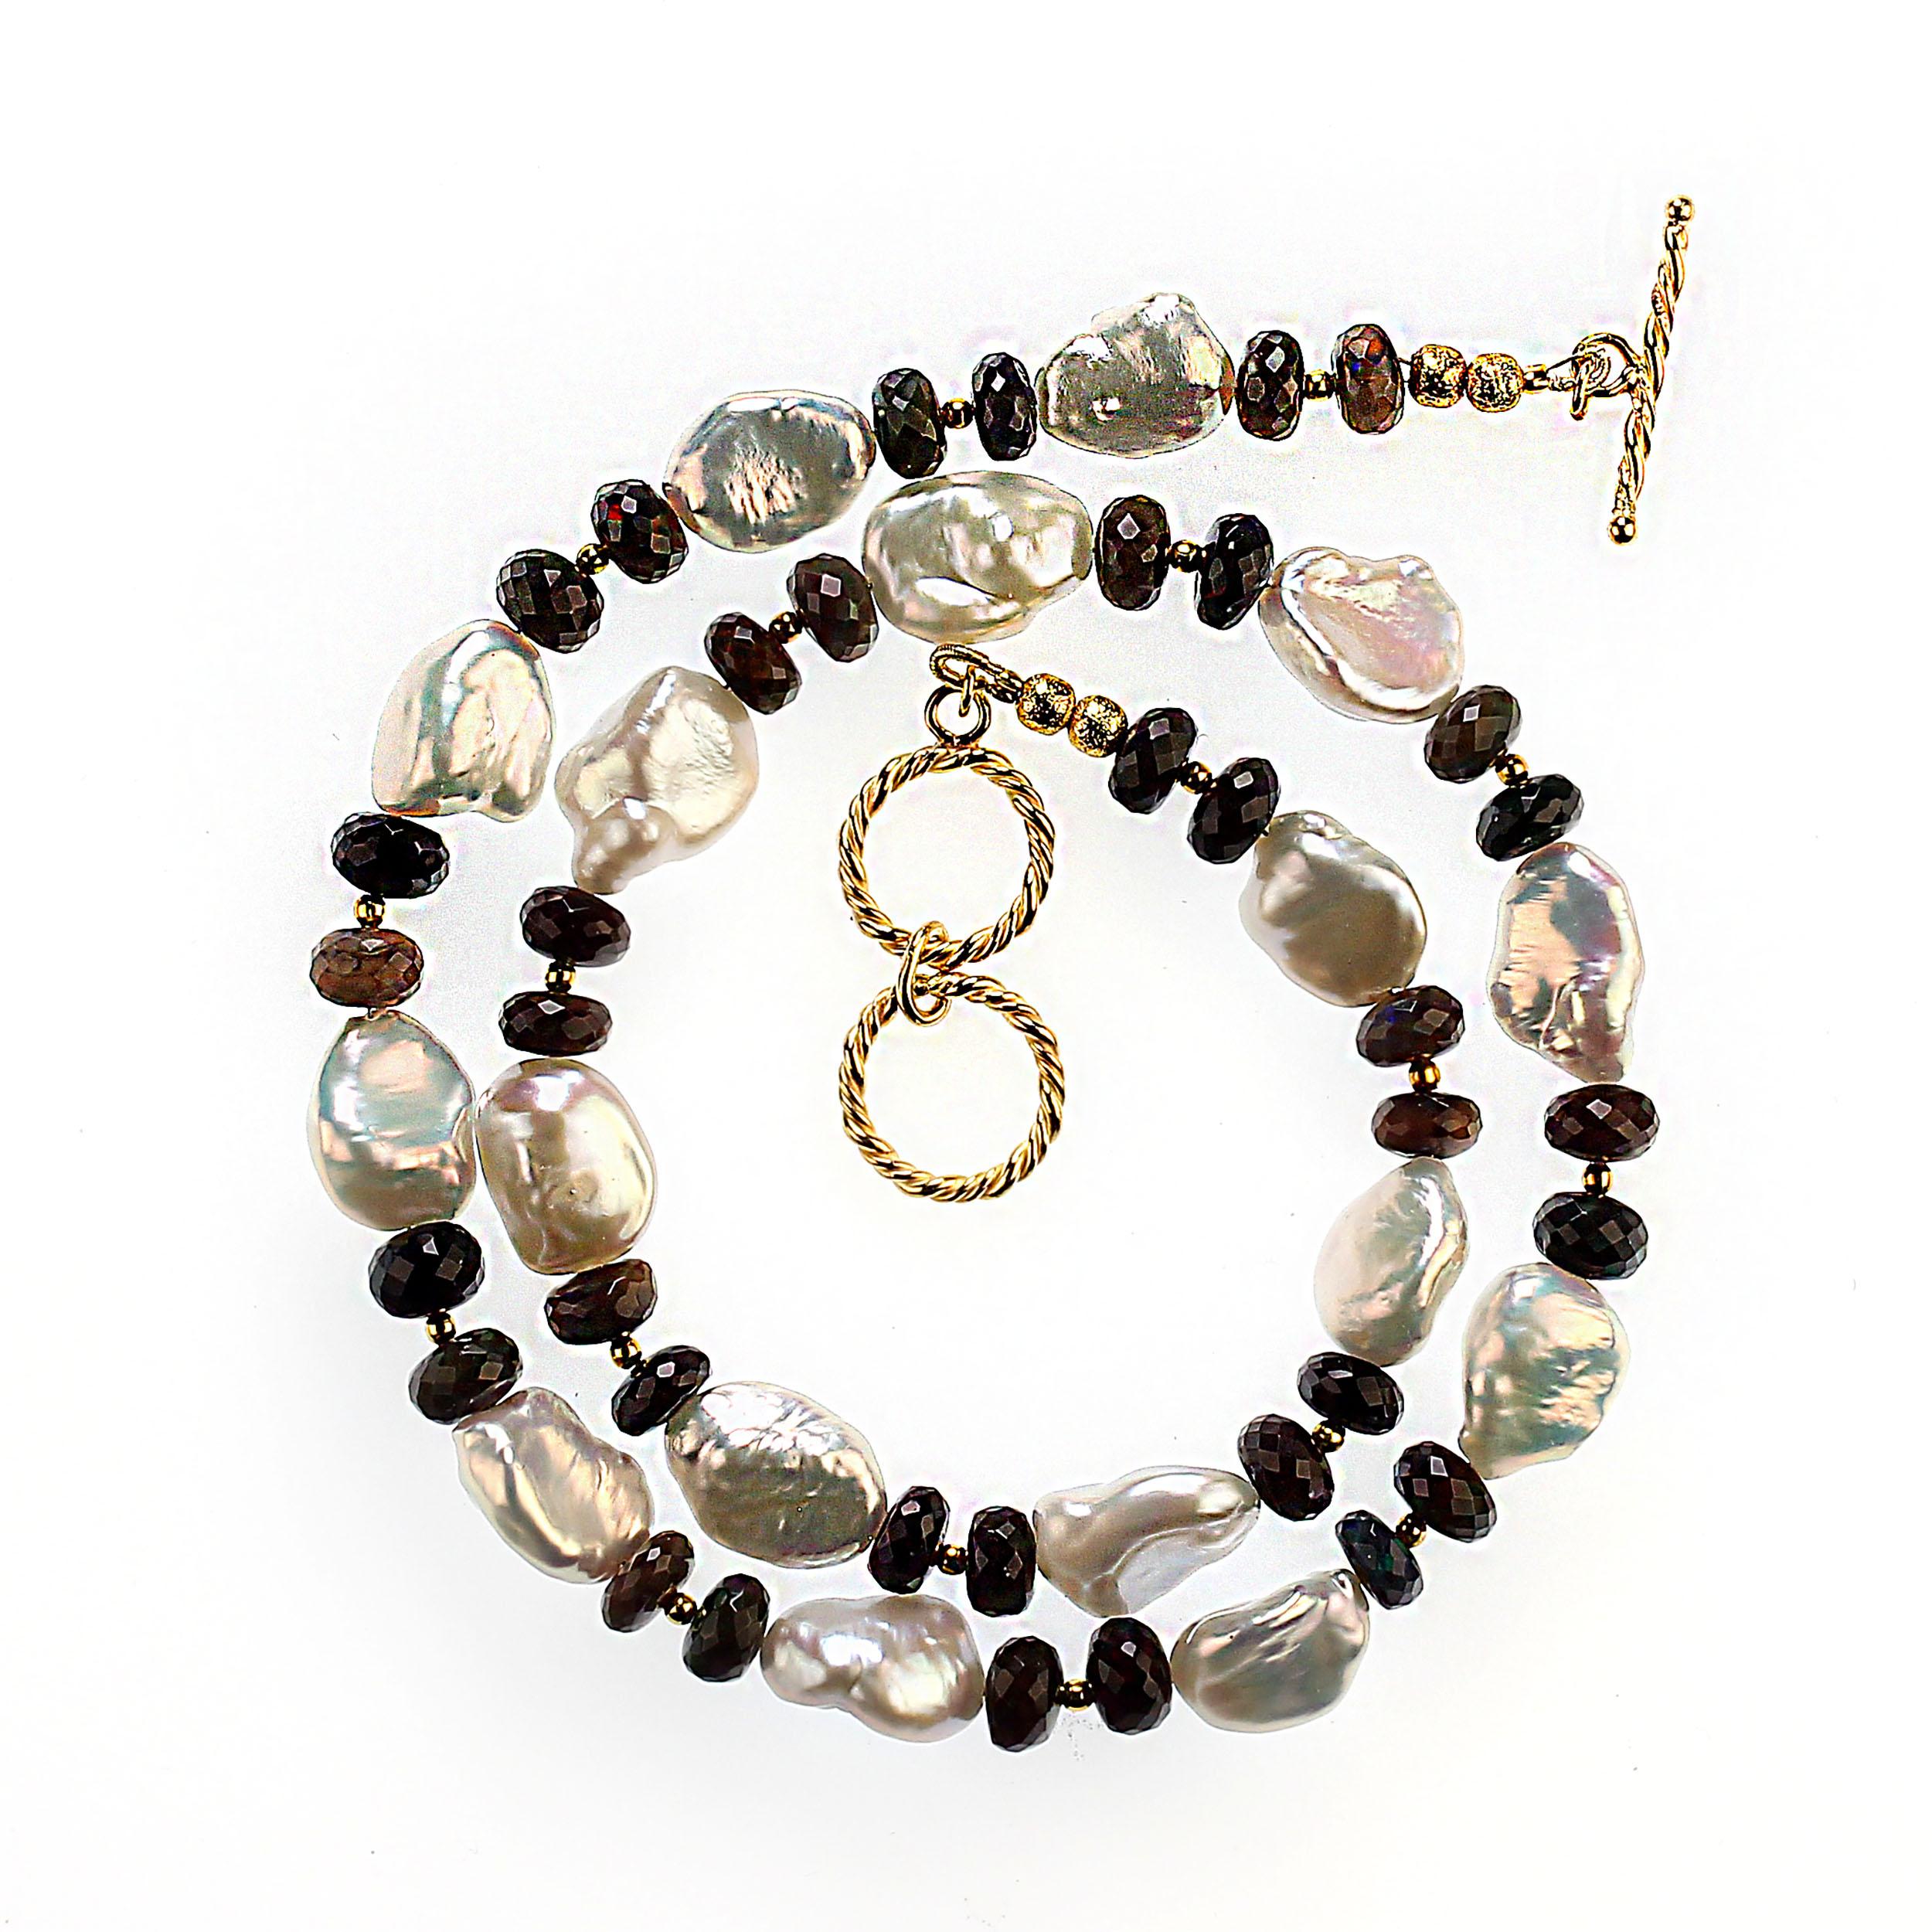 Elegant and always stylish, this 19-inch black and white necklace is perfect for all occasions. The black opal rondels flash pinks and greens. These lovely second harvest keshi pearls iridesce flashes of pink and yellow. Tiny goldy accents sit